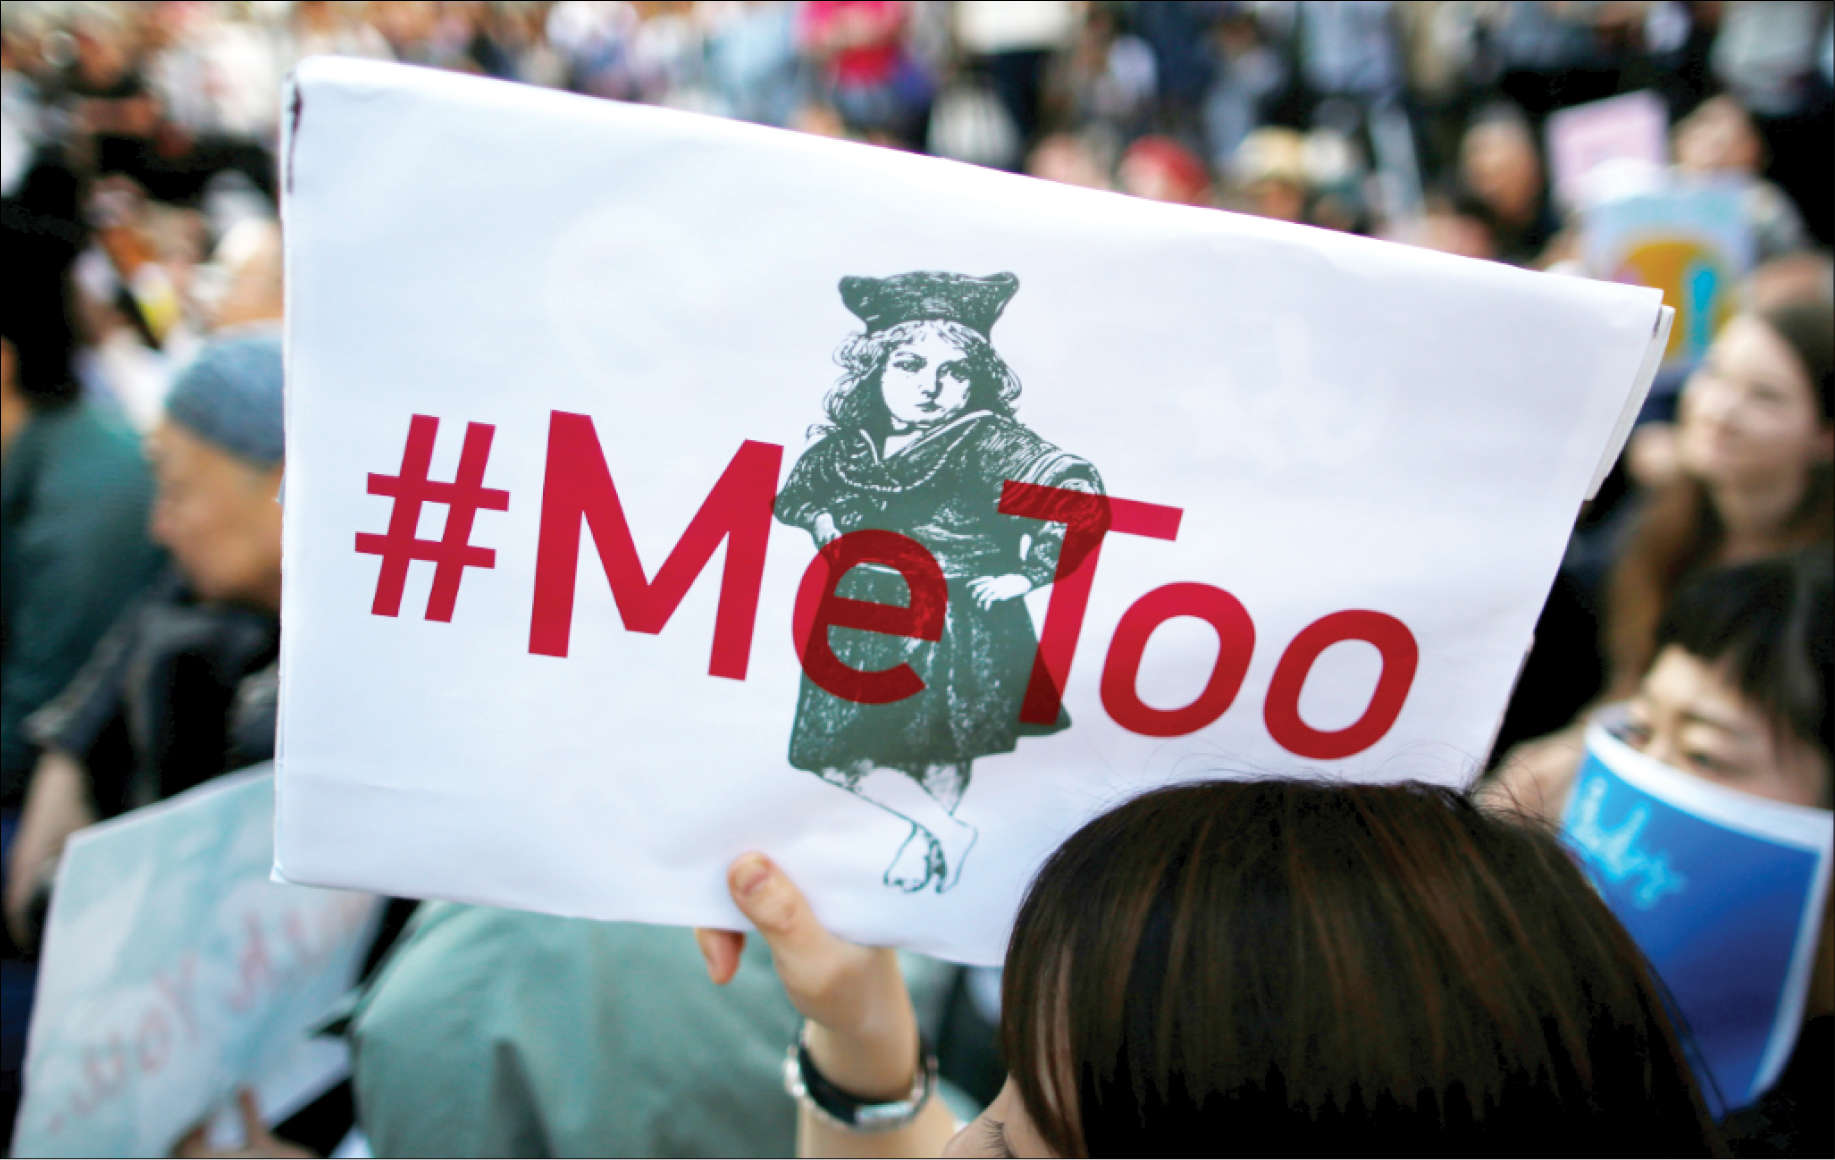 #METOO MOVEMENT TO SHOW HOW FAR WE’VE COME